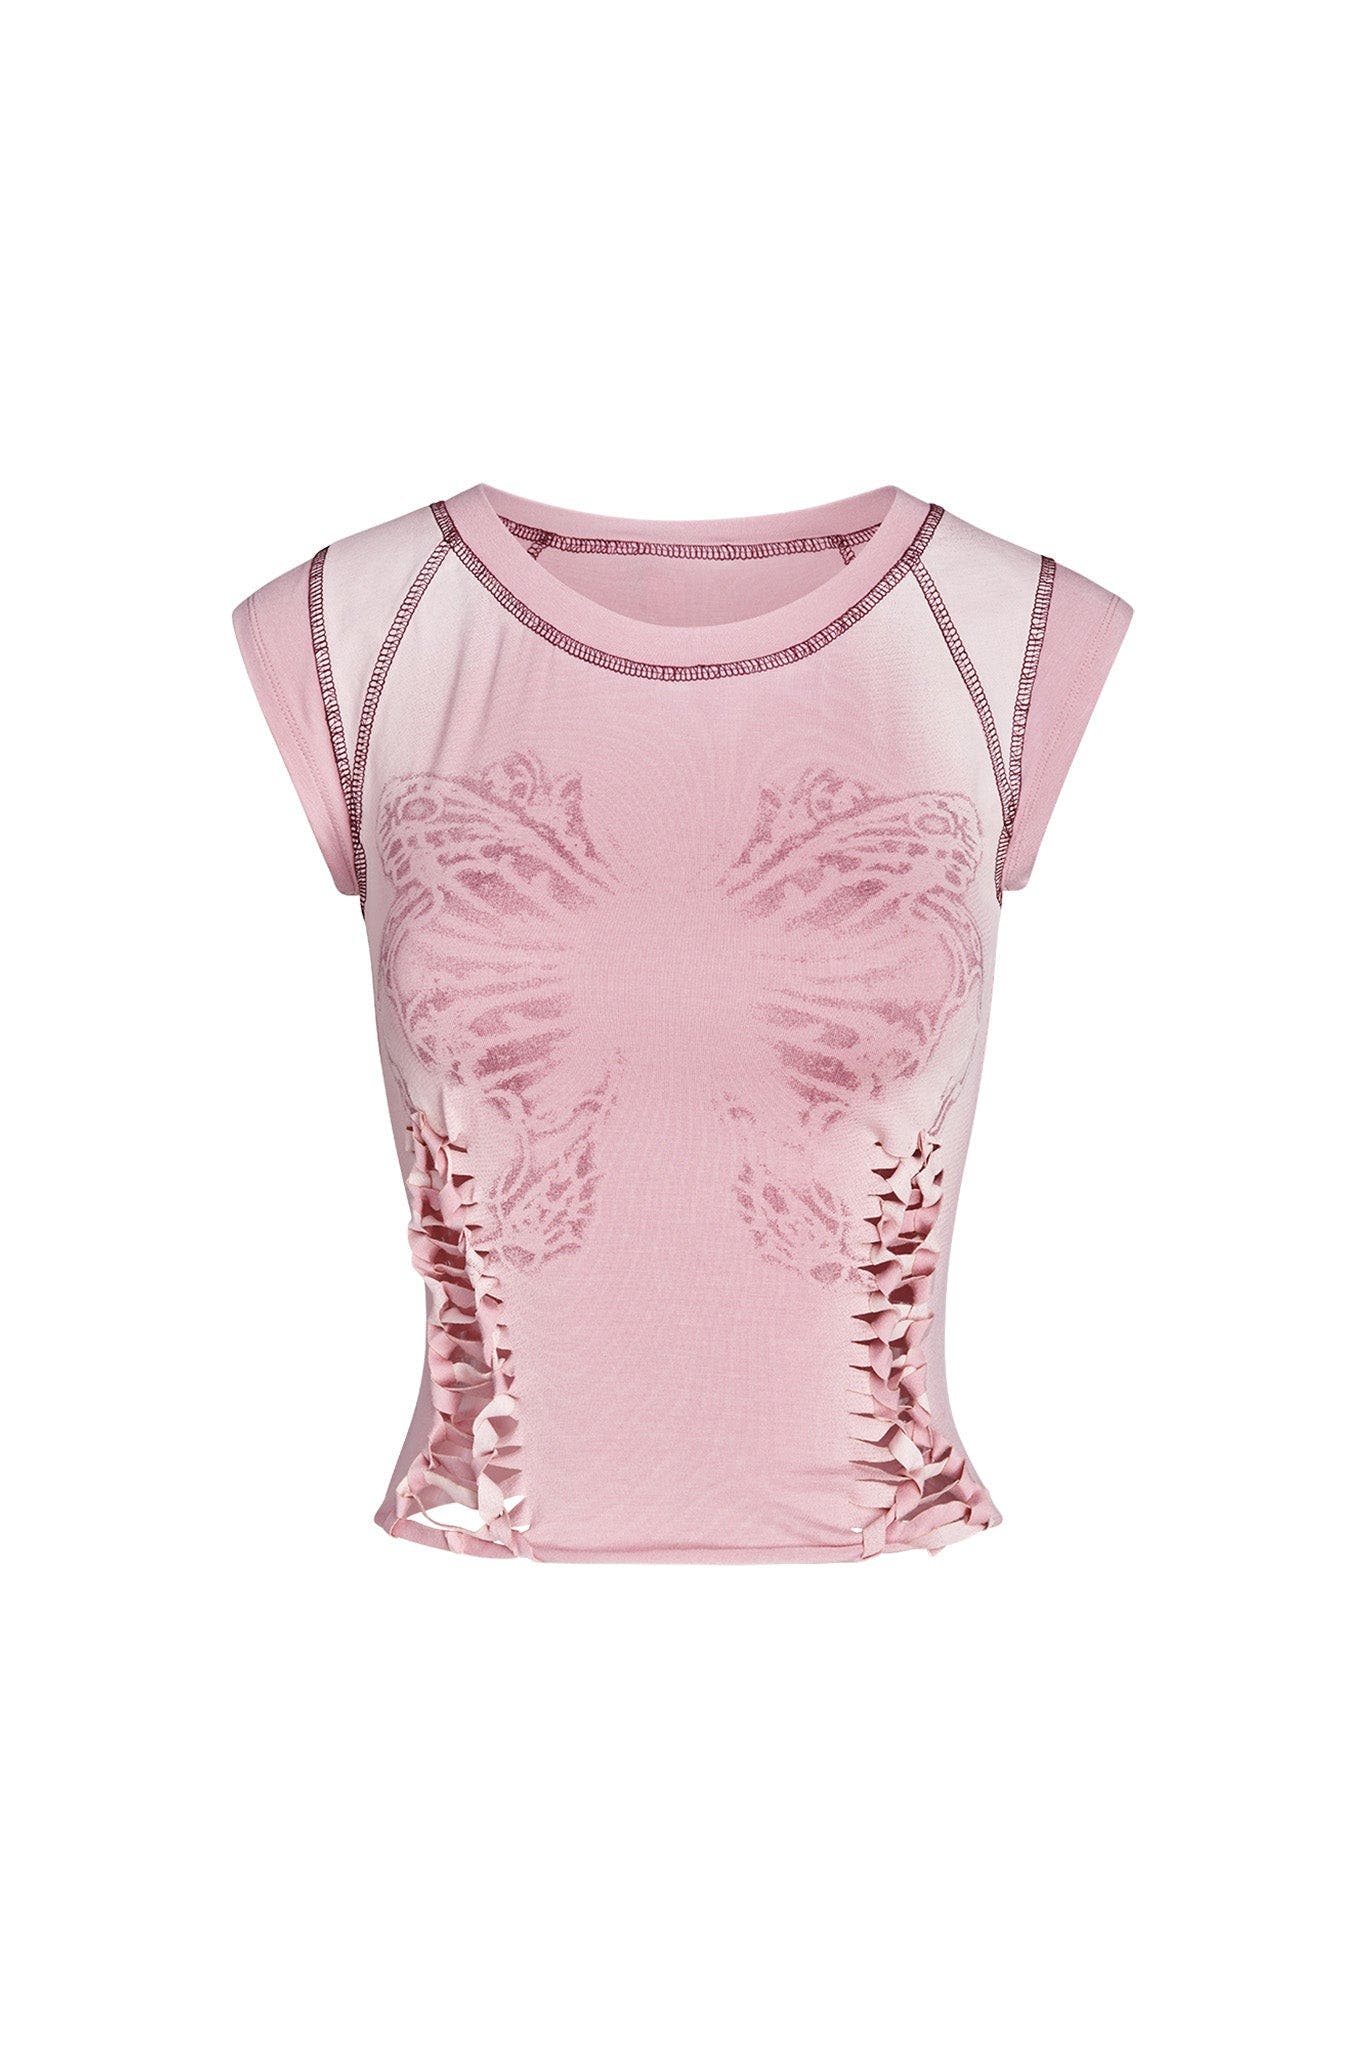 BRIAR TOP - PINK : BUTTERFLY